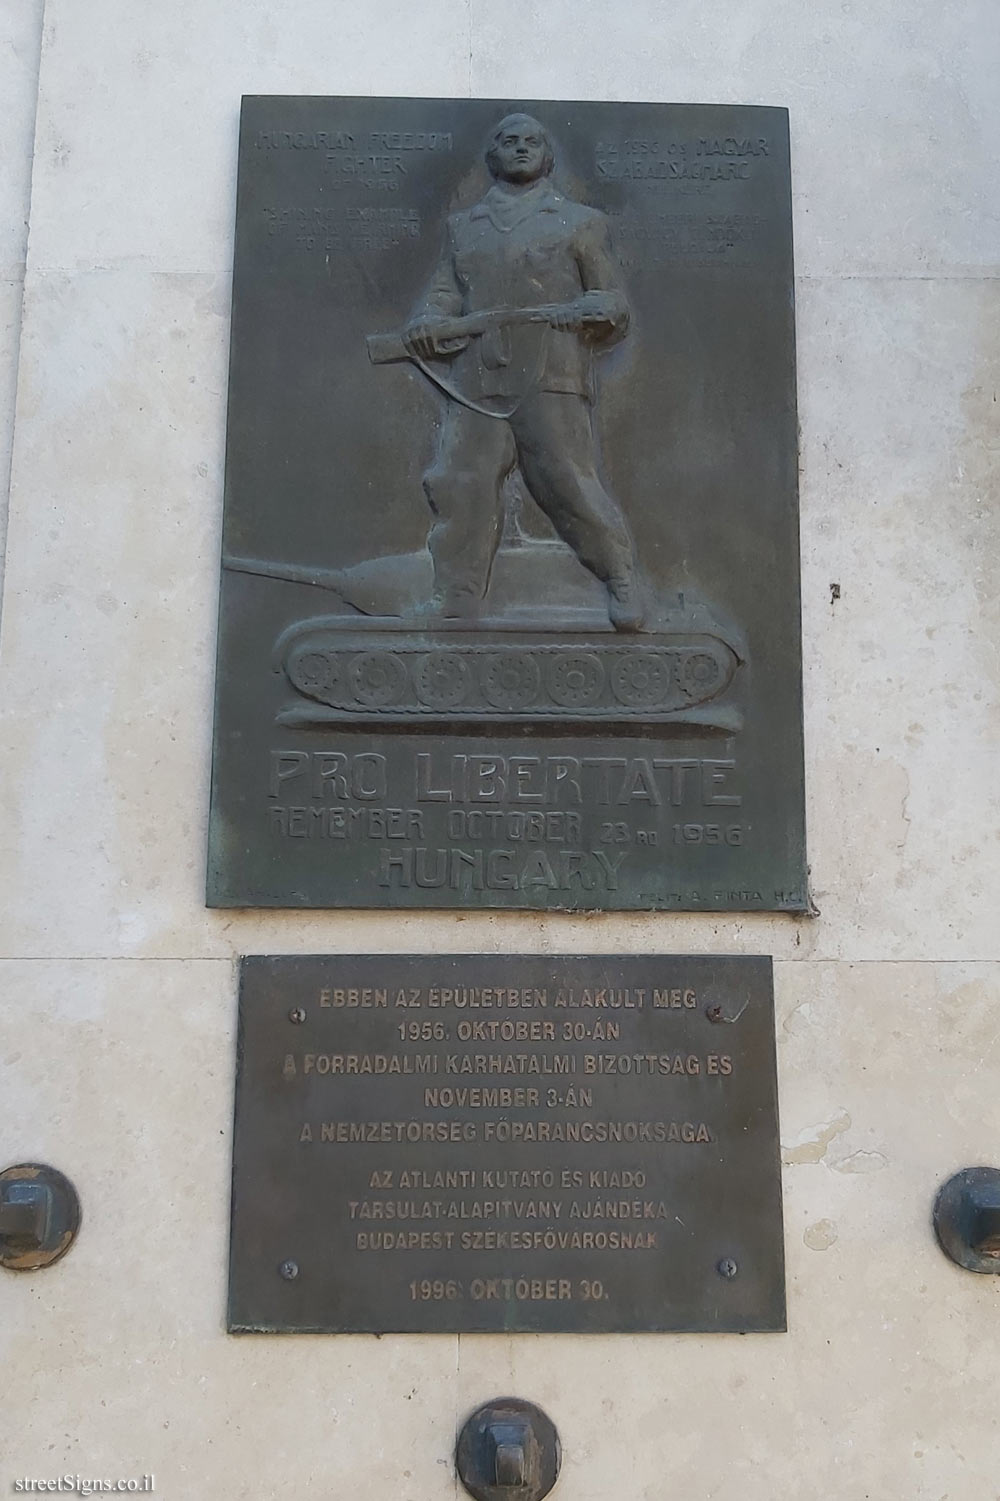 Budapest - a board of honor to the Hungarian freedom fighter in the Hungarian uprising